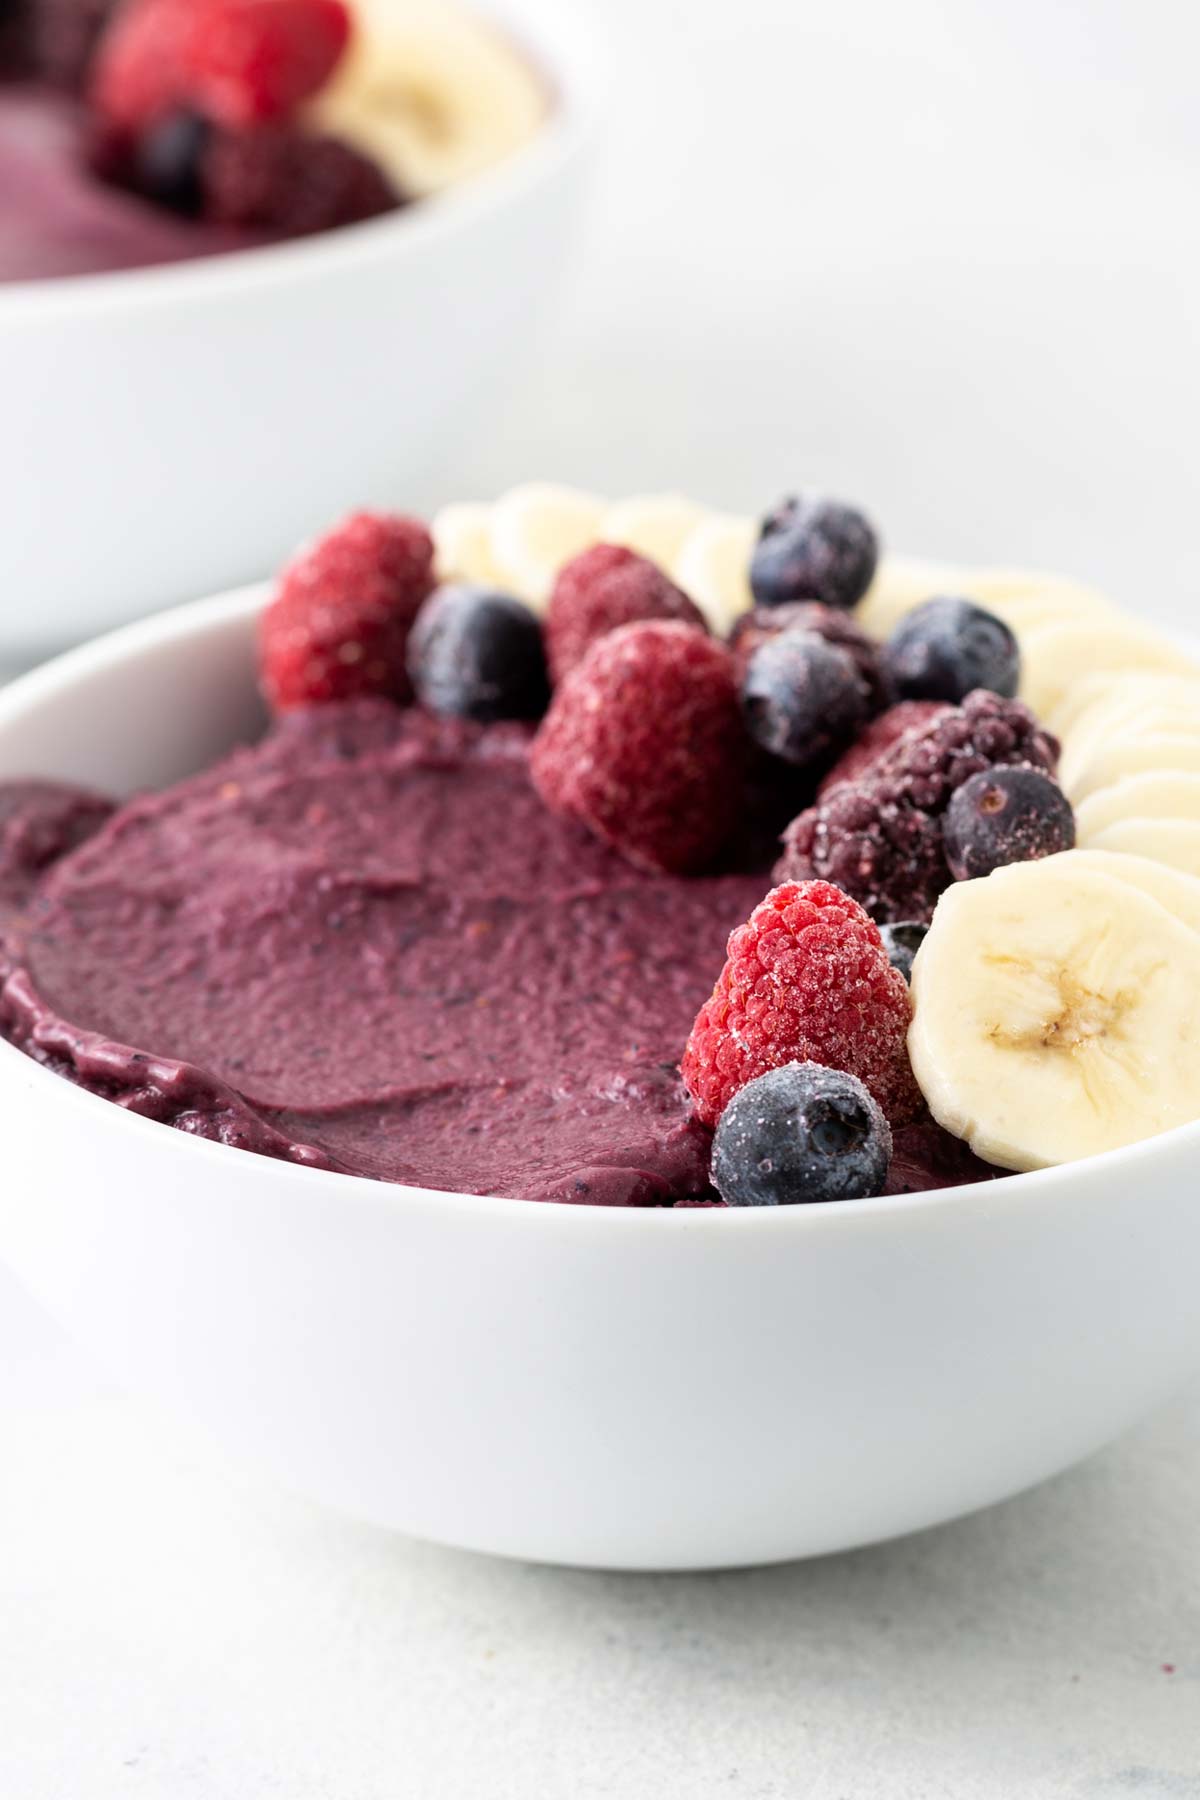 Acai smoothie bowl topped with berries and sliced bananas.